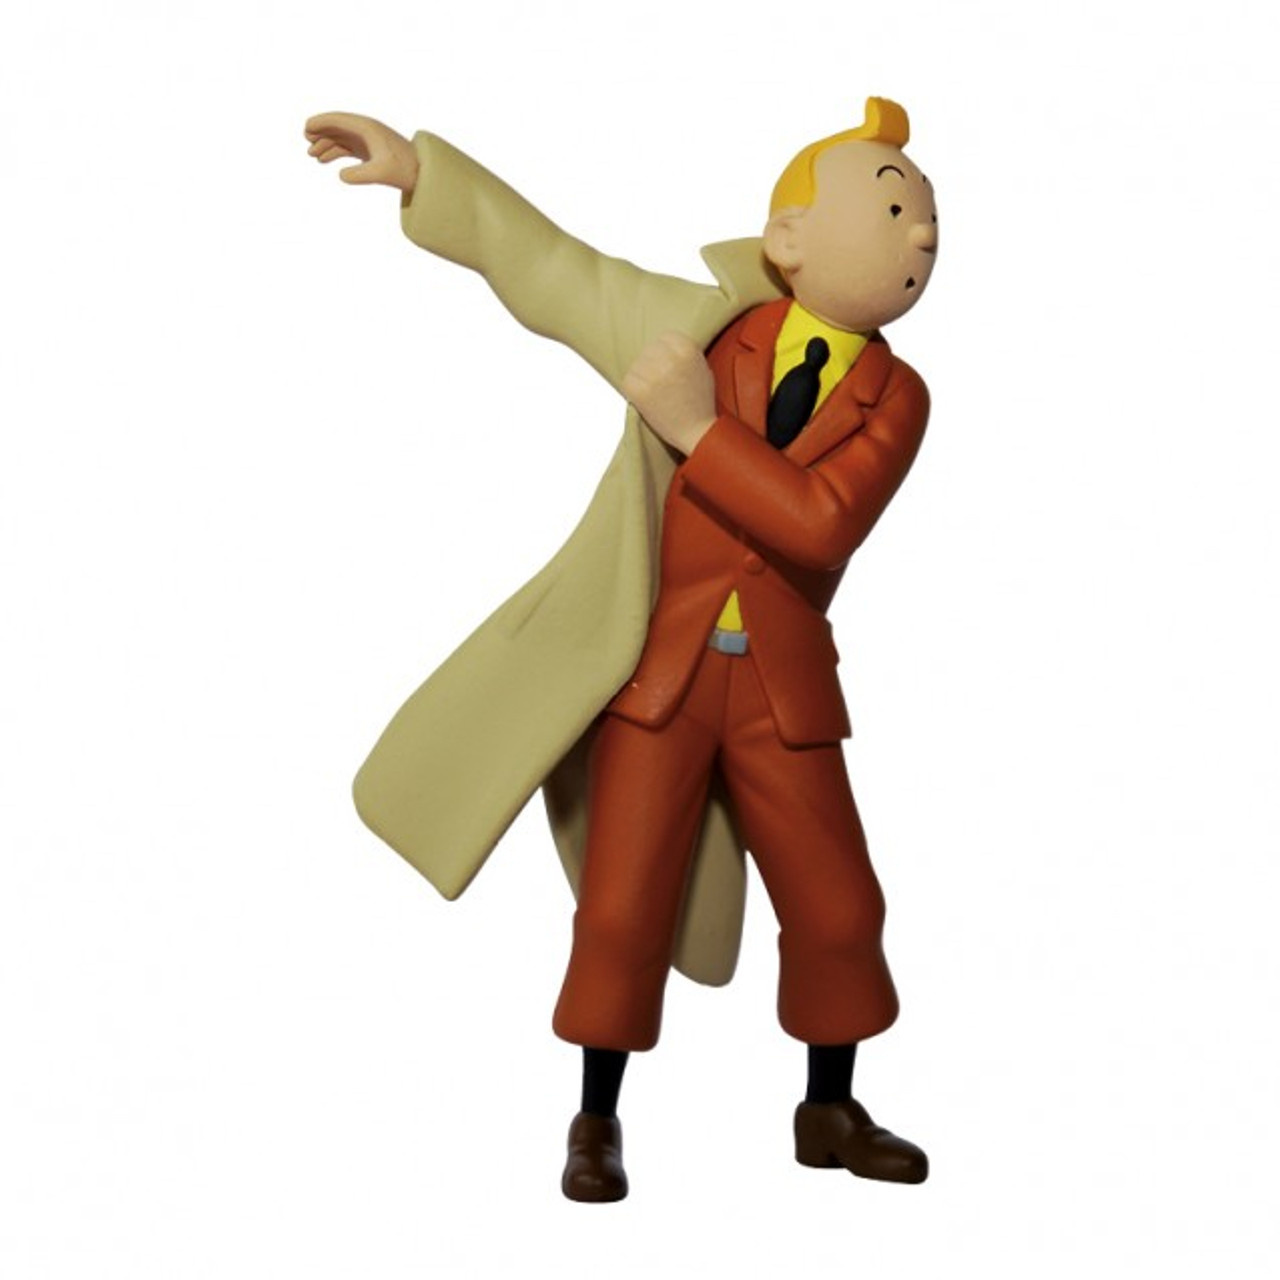 TINTIN FIGURINES OFFICIAL No 1 Tintin in His Trench Coat 